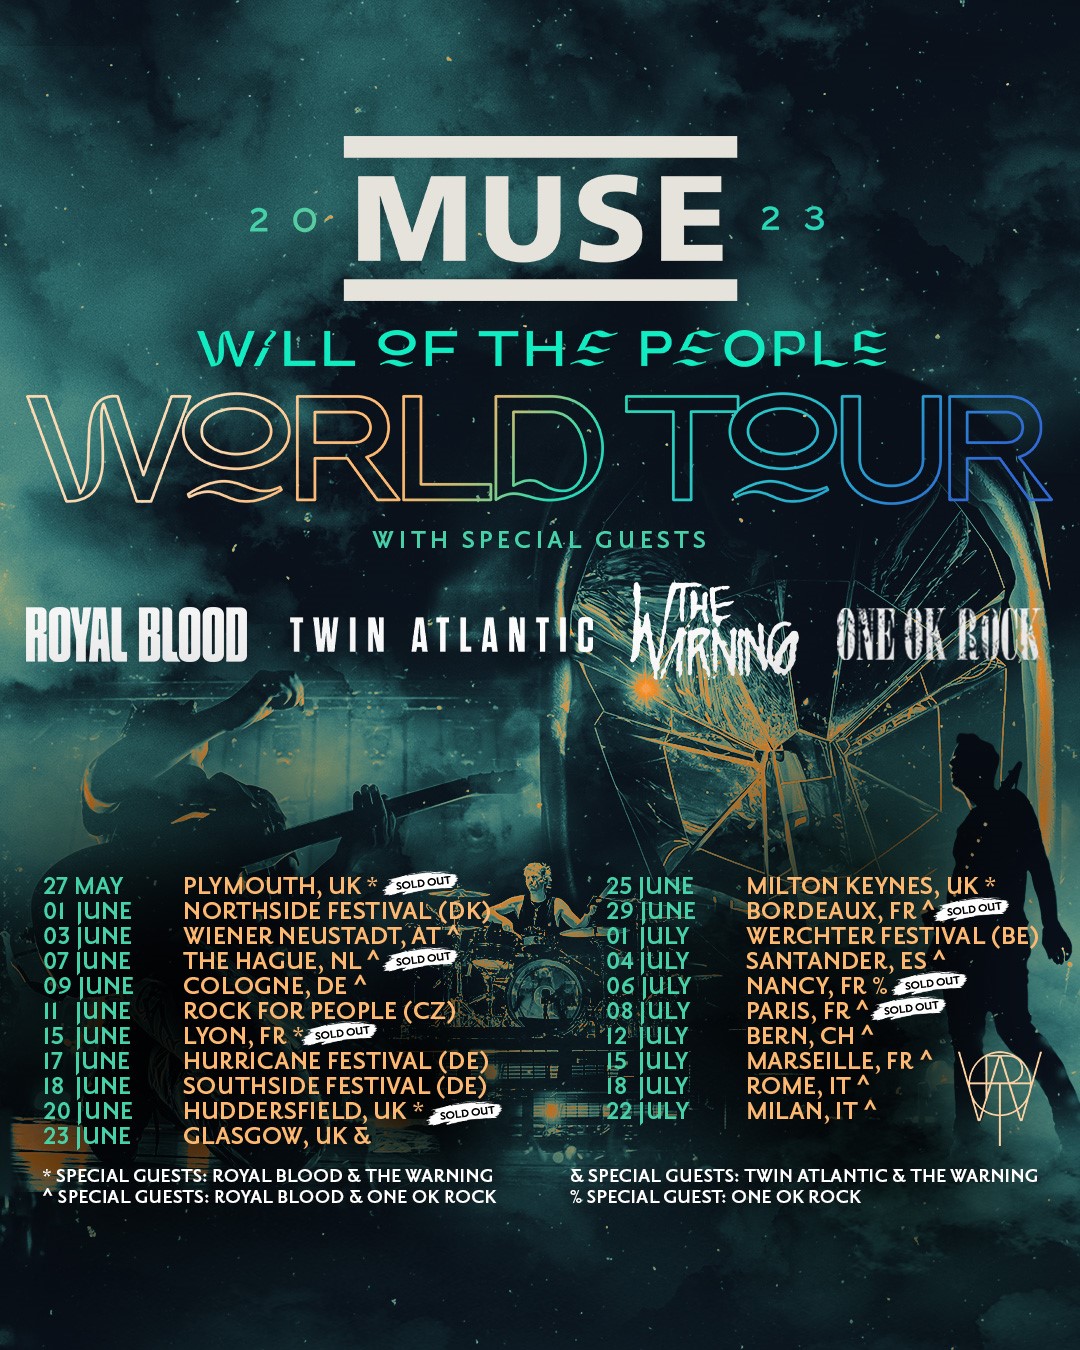 MUSE WILL OF THE PEOPLE WORLD TOUR